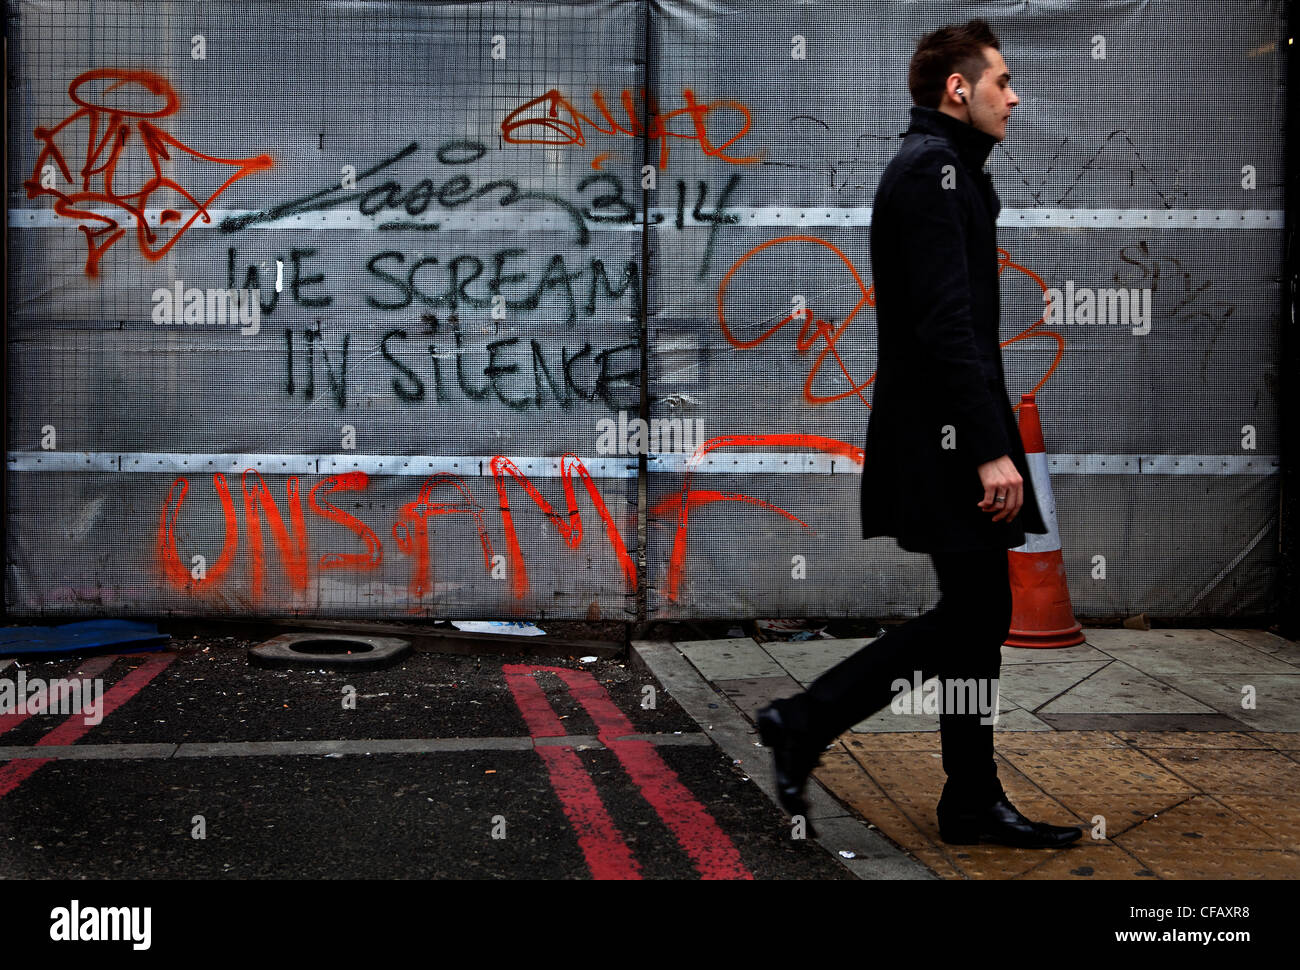 Street graffiti with young man walking past the statement 'We scream in silence', Whitechapel, London. Stock Photo